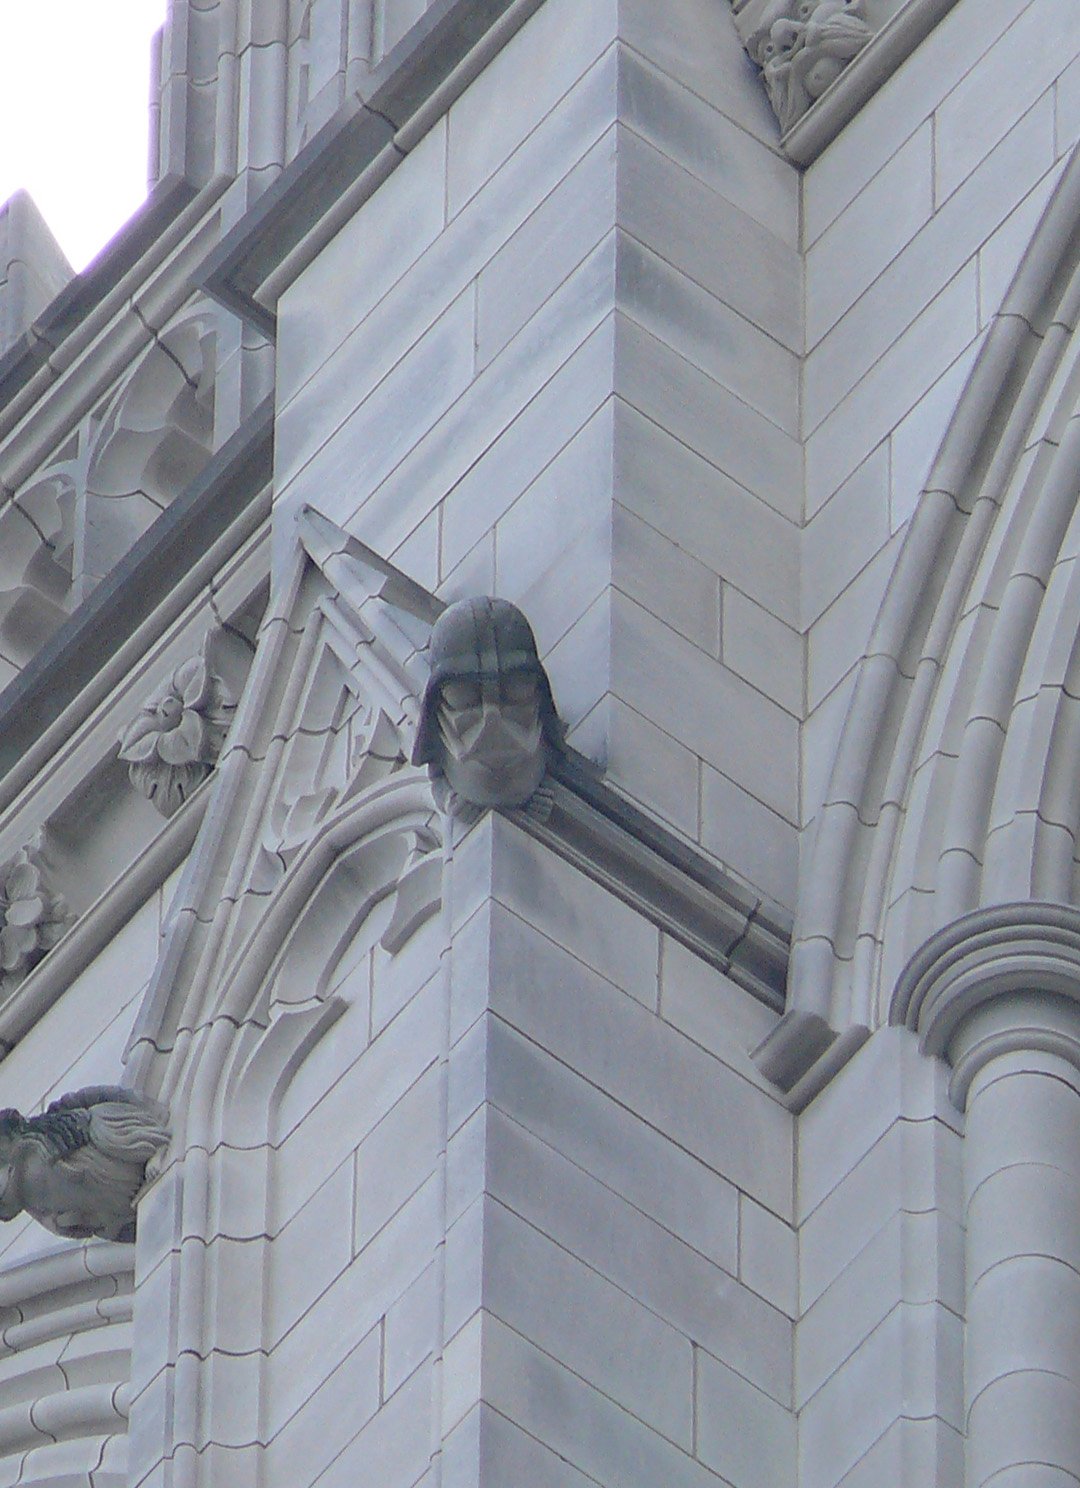 Darth Vader grotesque on the northwest tower of the Washington National Cathedral. - Cyraxote